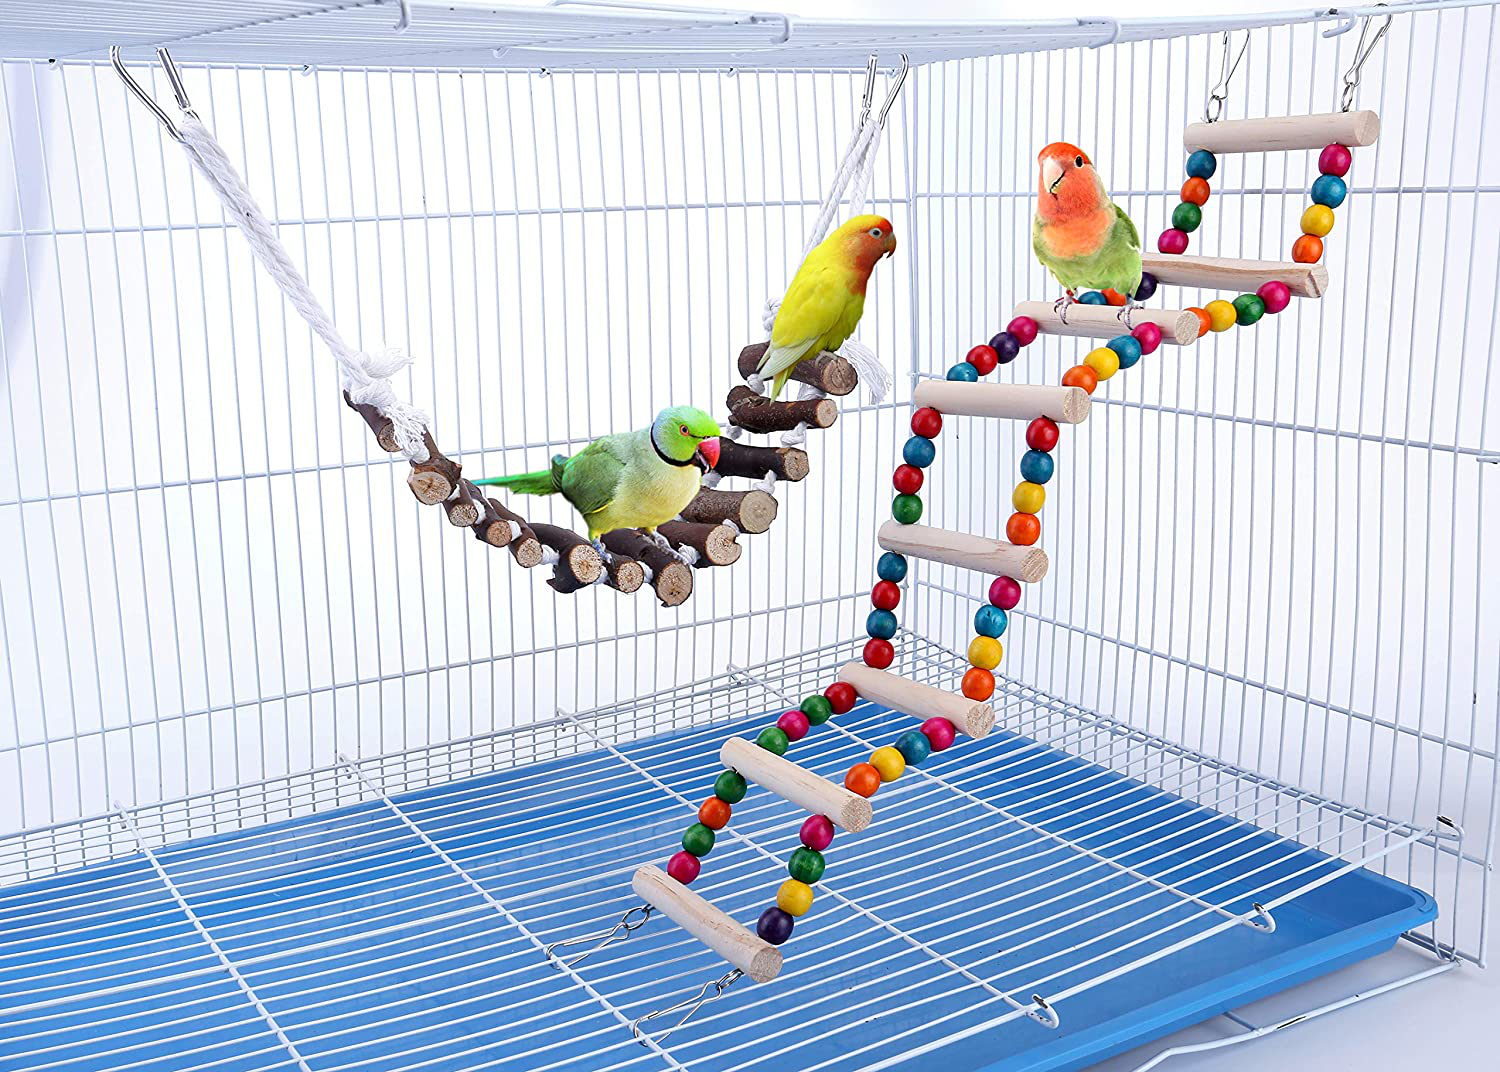 Filhome 2 Pck Bird Parrot Ladder Bridge, Swing Chewing Bird Toys Cage Accessories for Small Parakeets Cockatiels, Conures, Macaws, Finches Animals & Pet Supplies > Pet Supplies > Bird Supplies > Bird Cage Accessories Filhome   